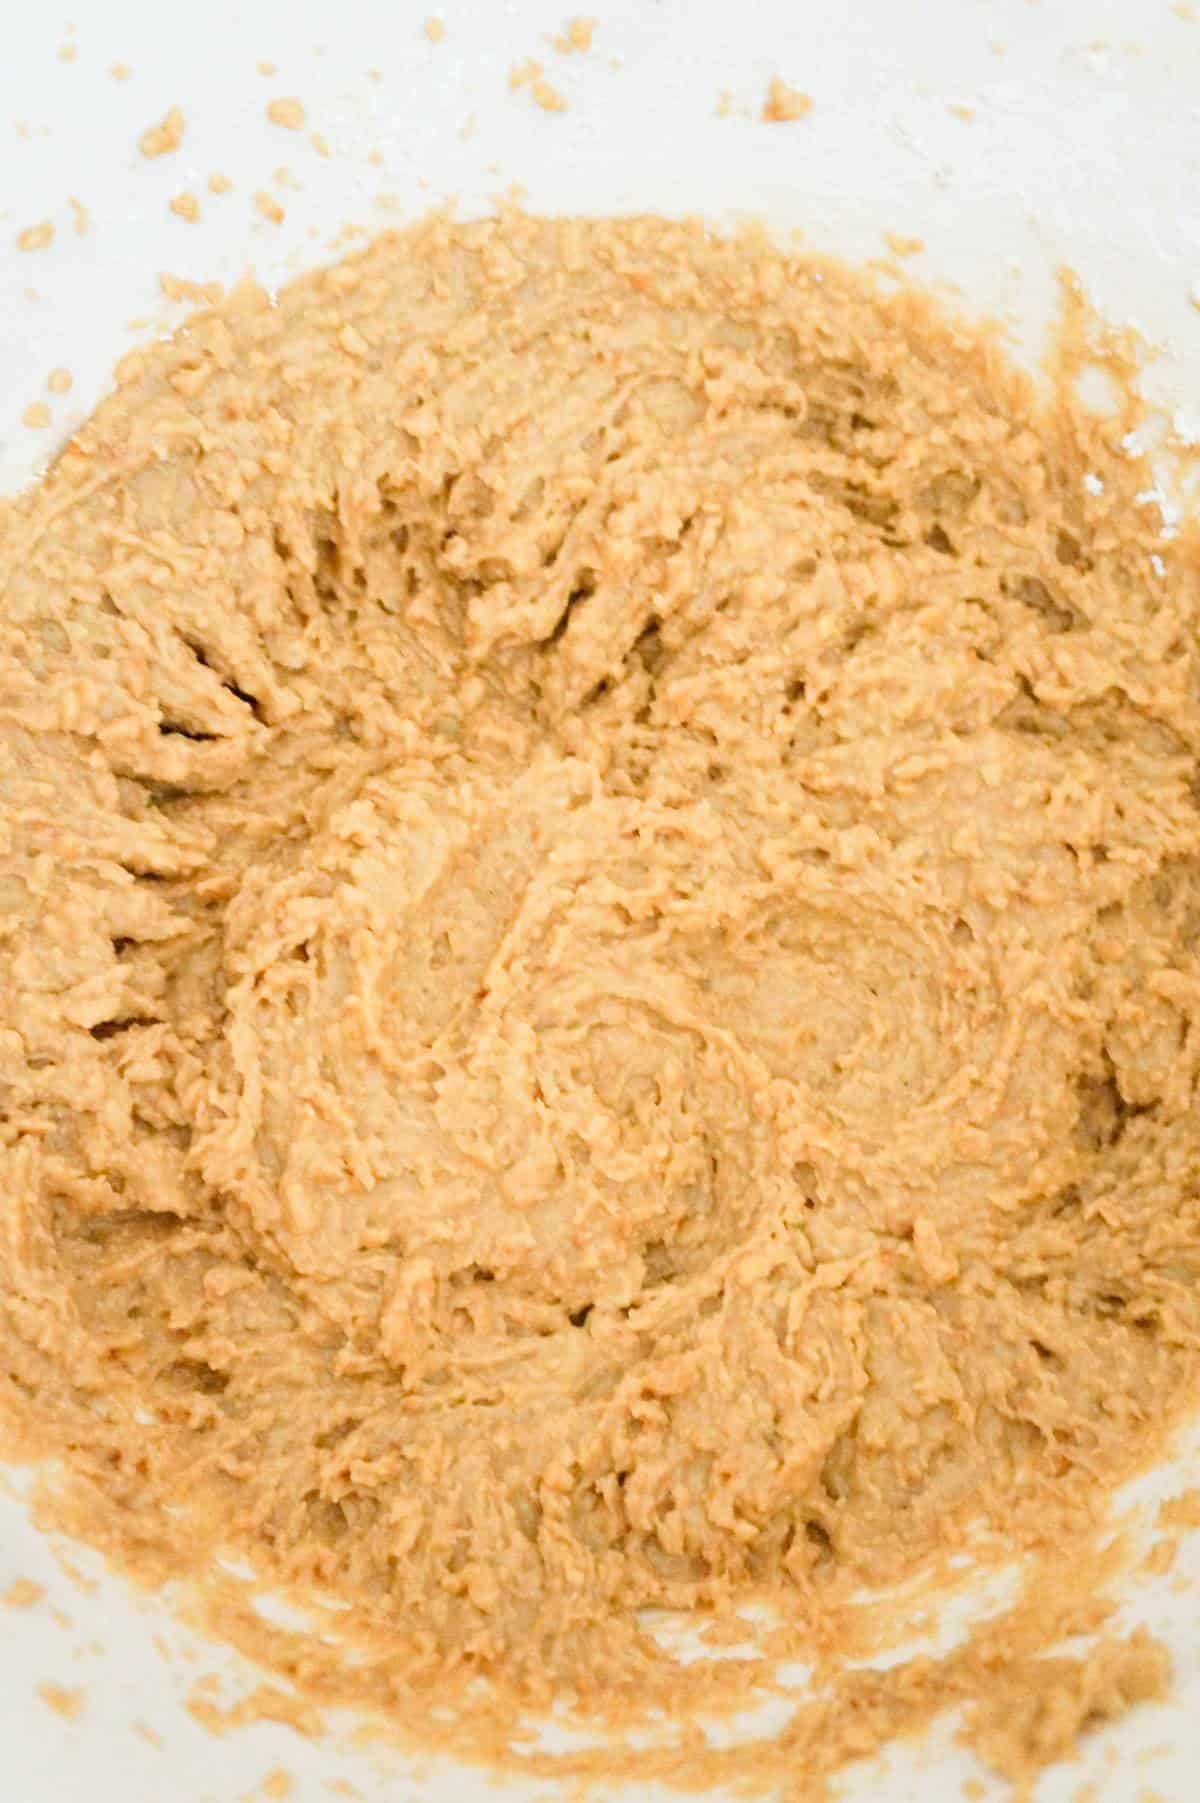 creamy peanut butter mixture in a mixing bowl